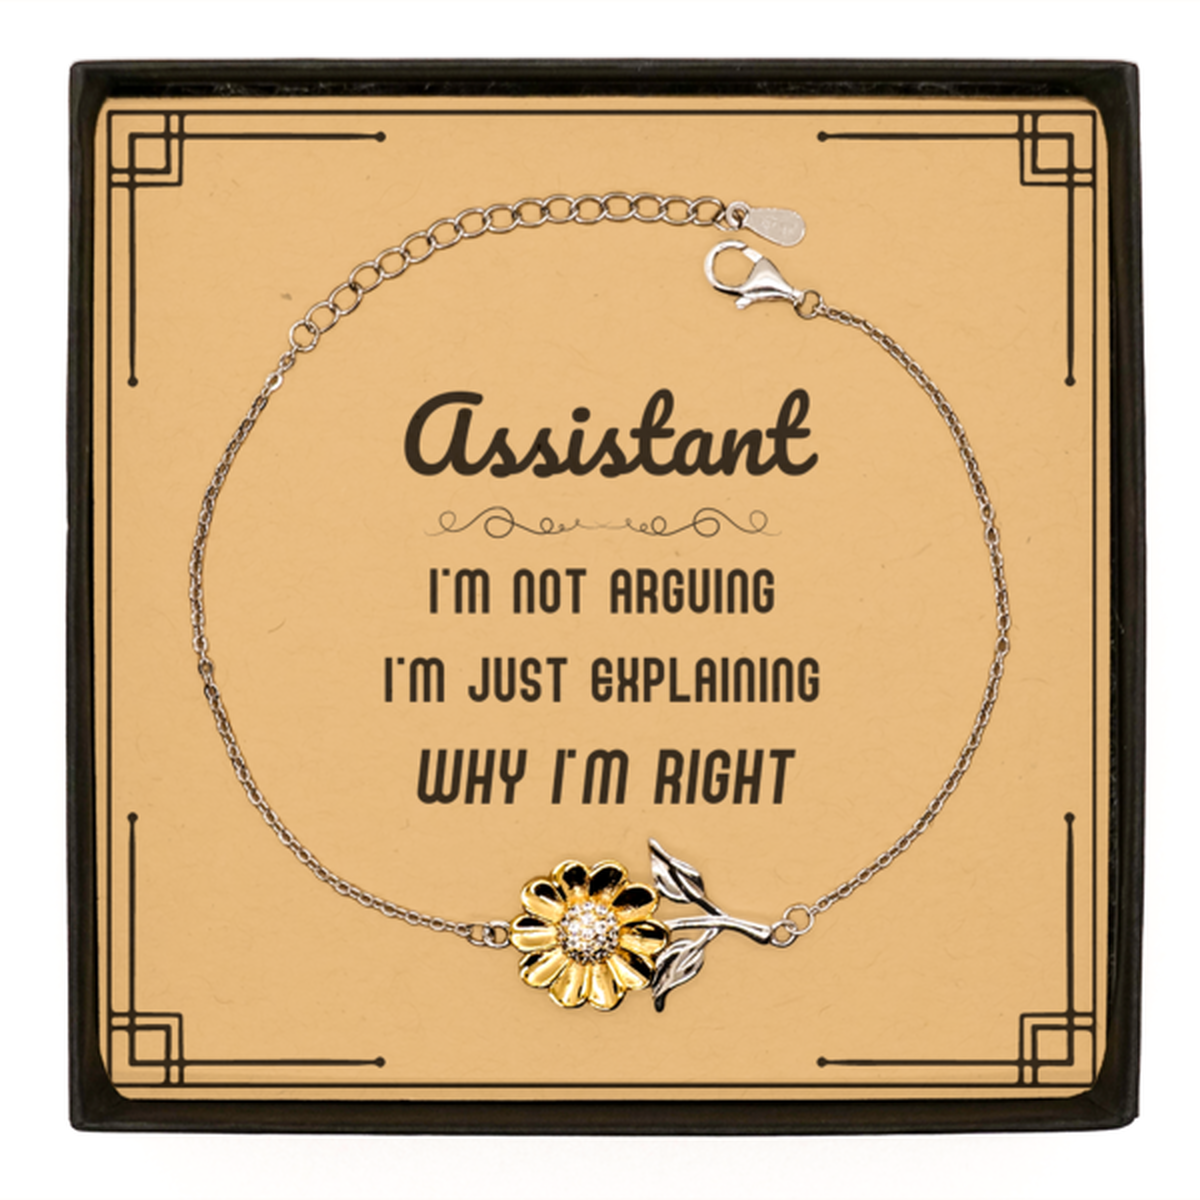 Assistant I'm not Arguing. I'm Just Explaining Why I'm RIGHT Sunflower Bracelet, Funny Saying Quote Assistant Gifts For Assistant Message Card Graduation Birthday Christmas Gifts for Men Women Coworker